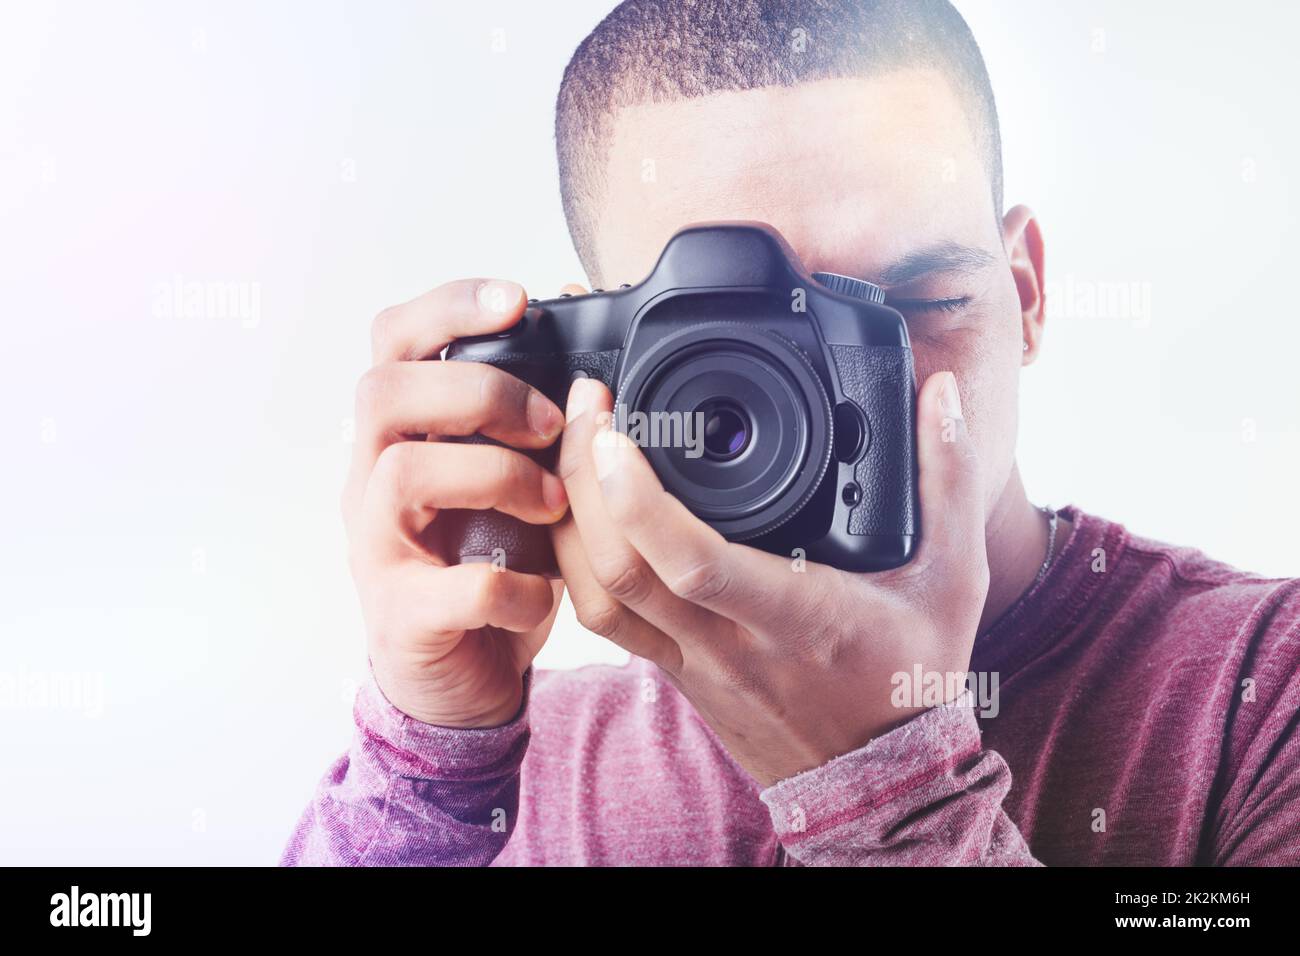 High key portrait of a Black male photographer with camera Stock Photo